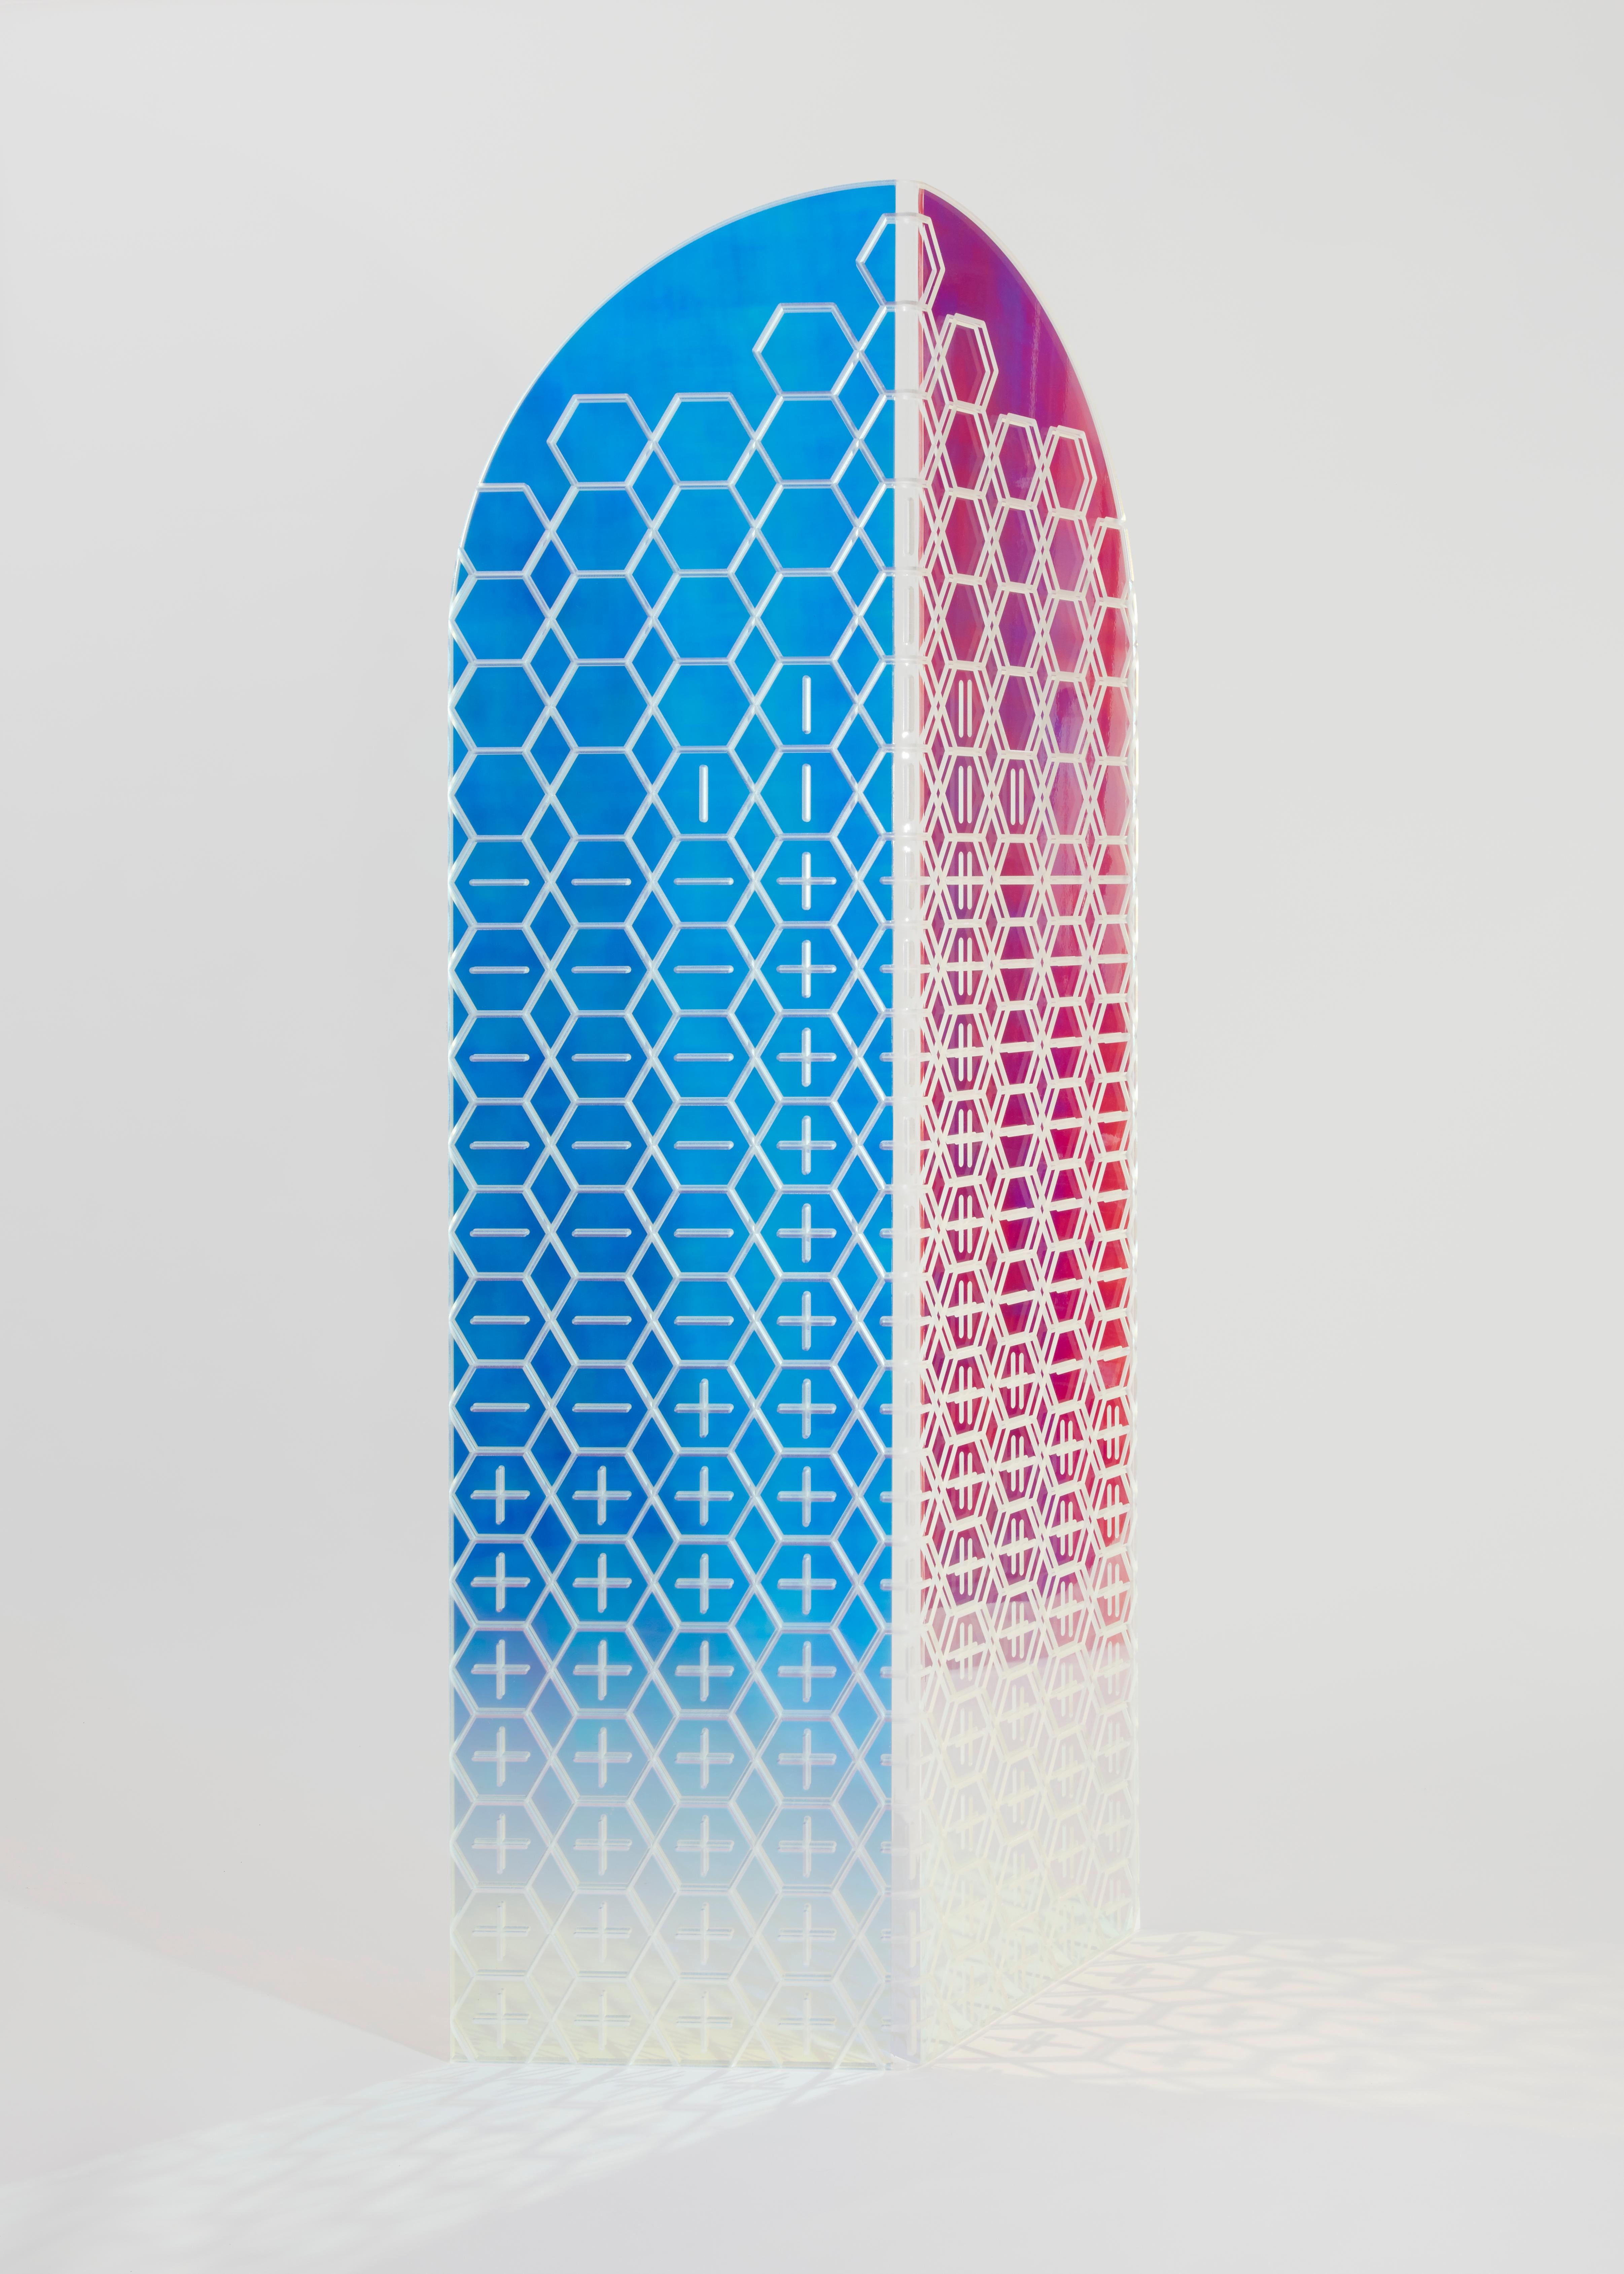 Prismania room divider by Elise Luttik
Limited Edition
Dimensions: D 21 x W 70 x H 165 cm
Materials: Acrylic with dichroic film.

The screen is topped by arches. To Elise Luttik the arches embody a door to a different world. The transparent screen